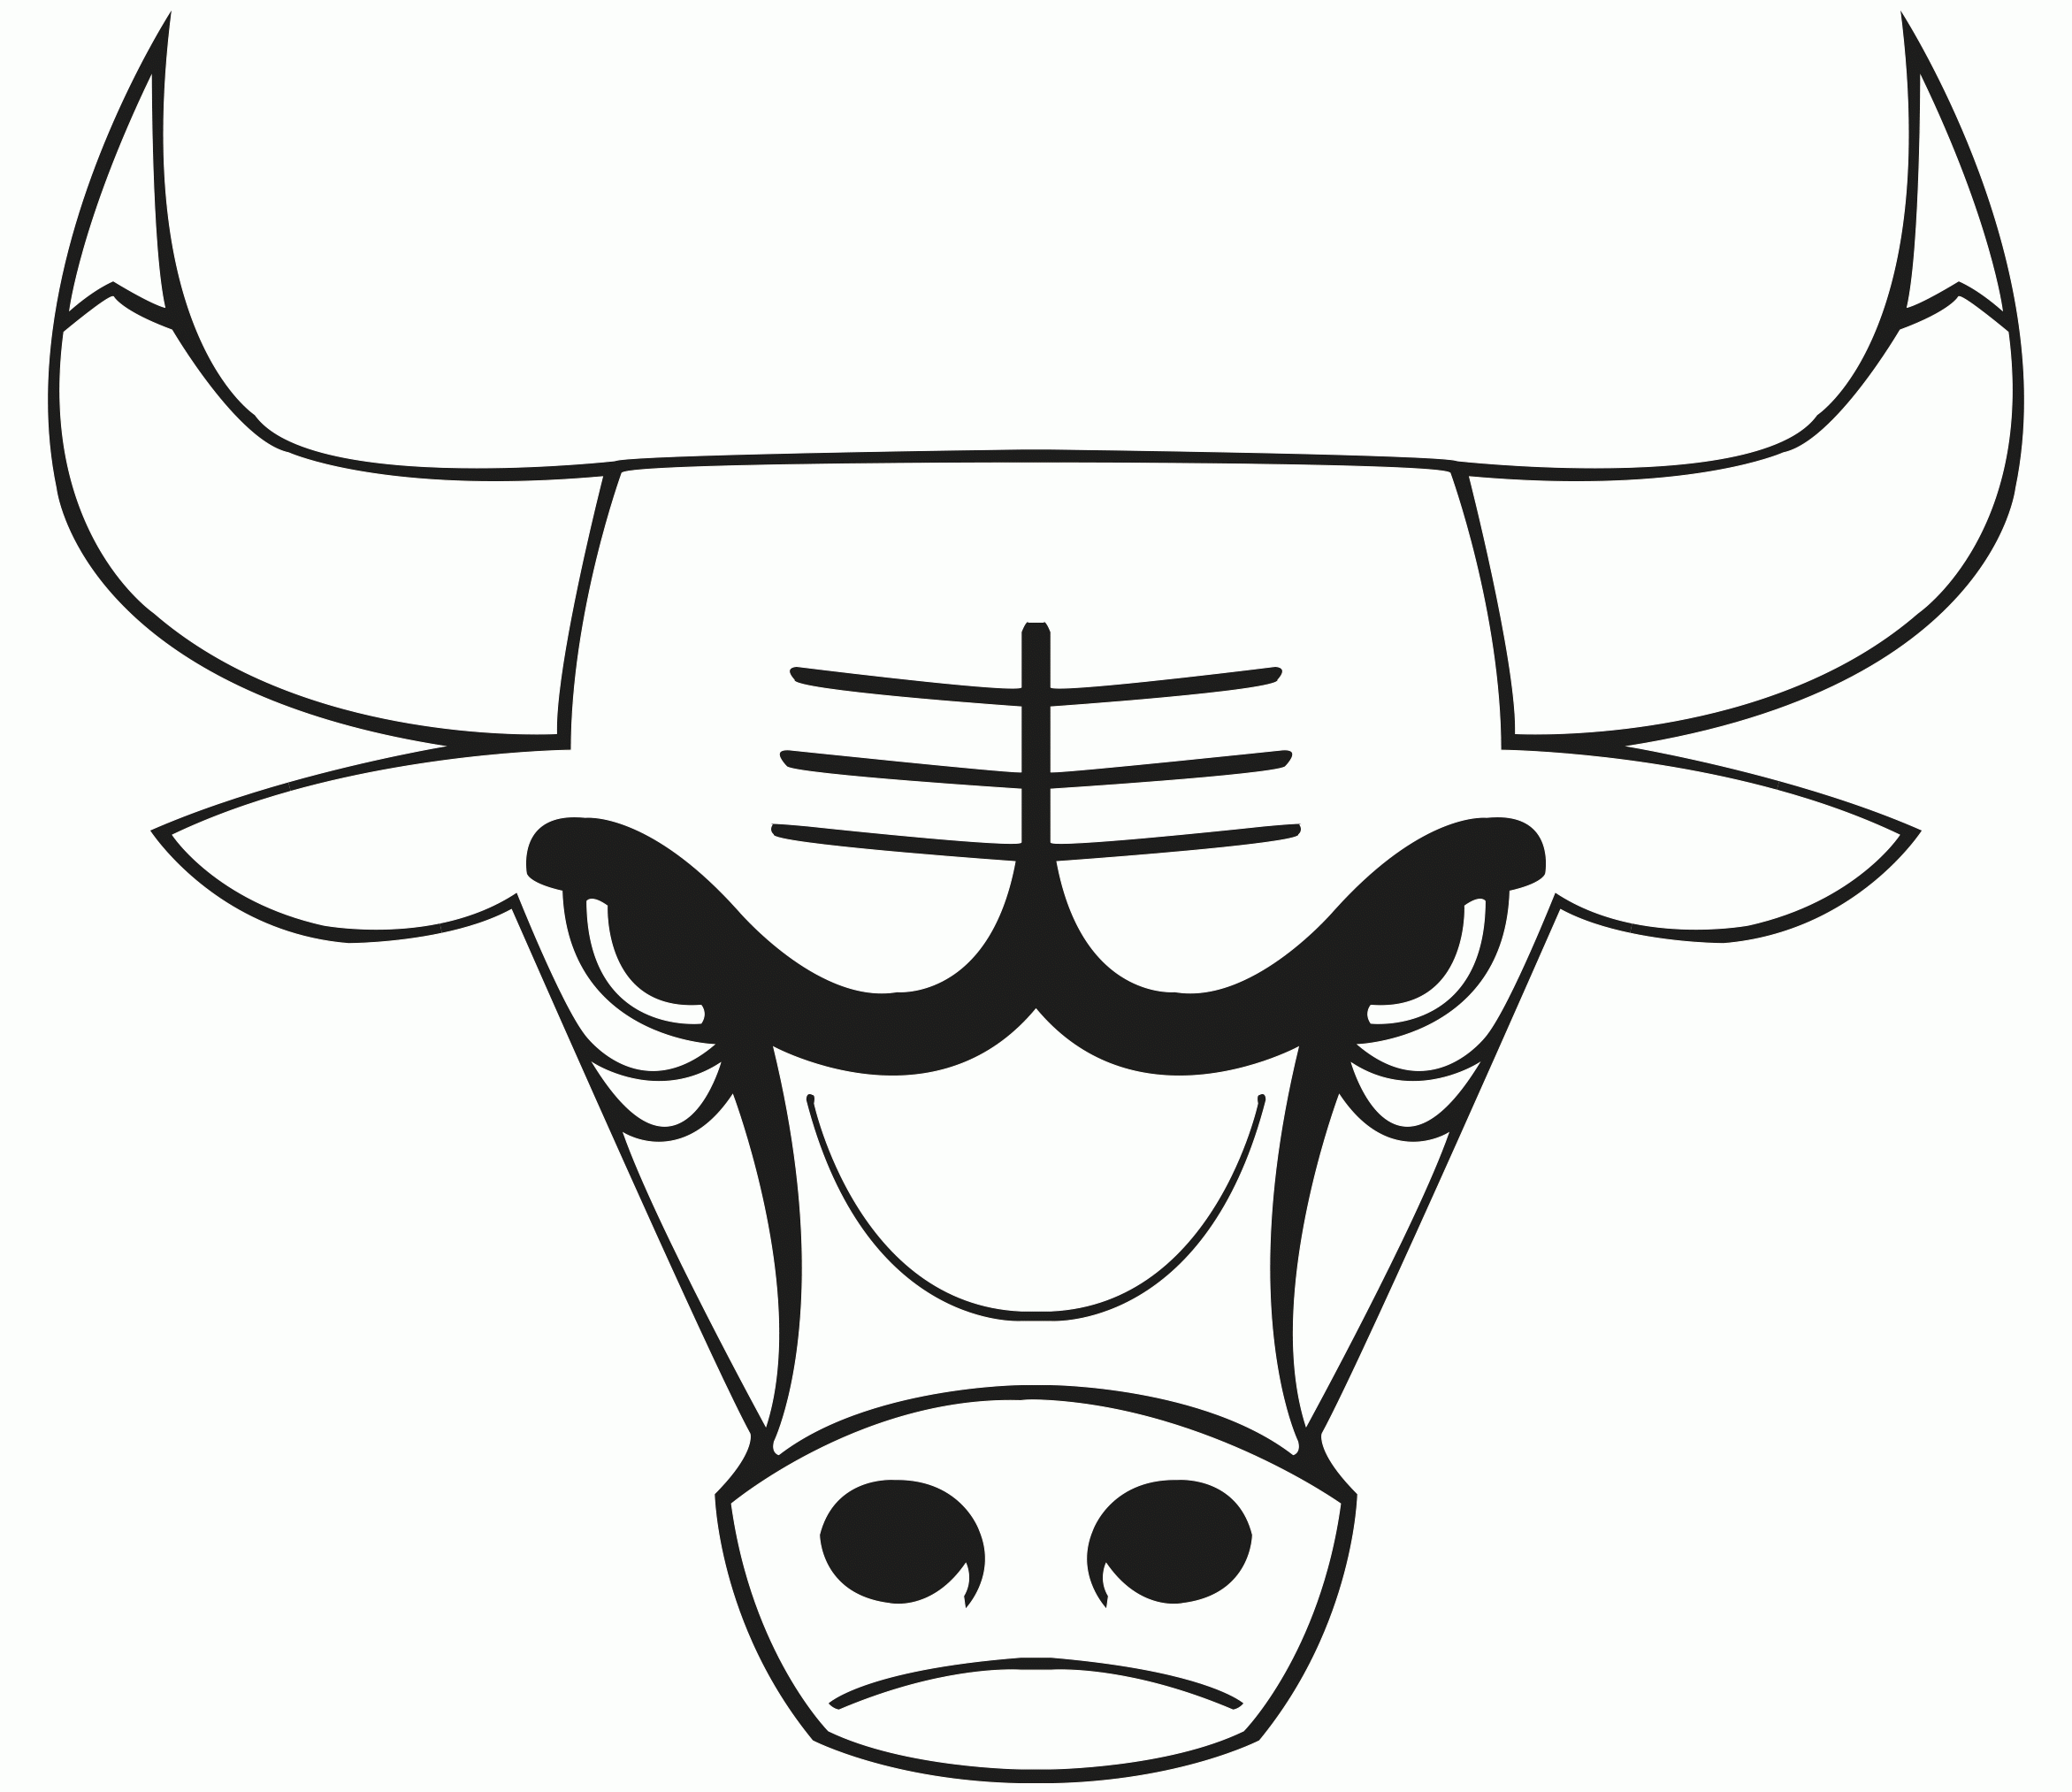 Chicago Bulls Coloring Pages - Coloring Home